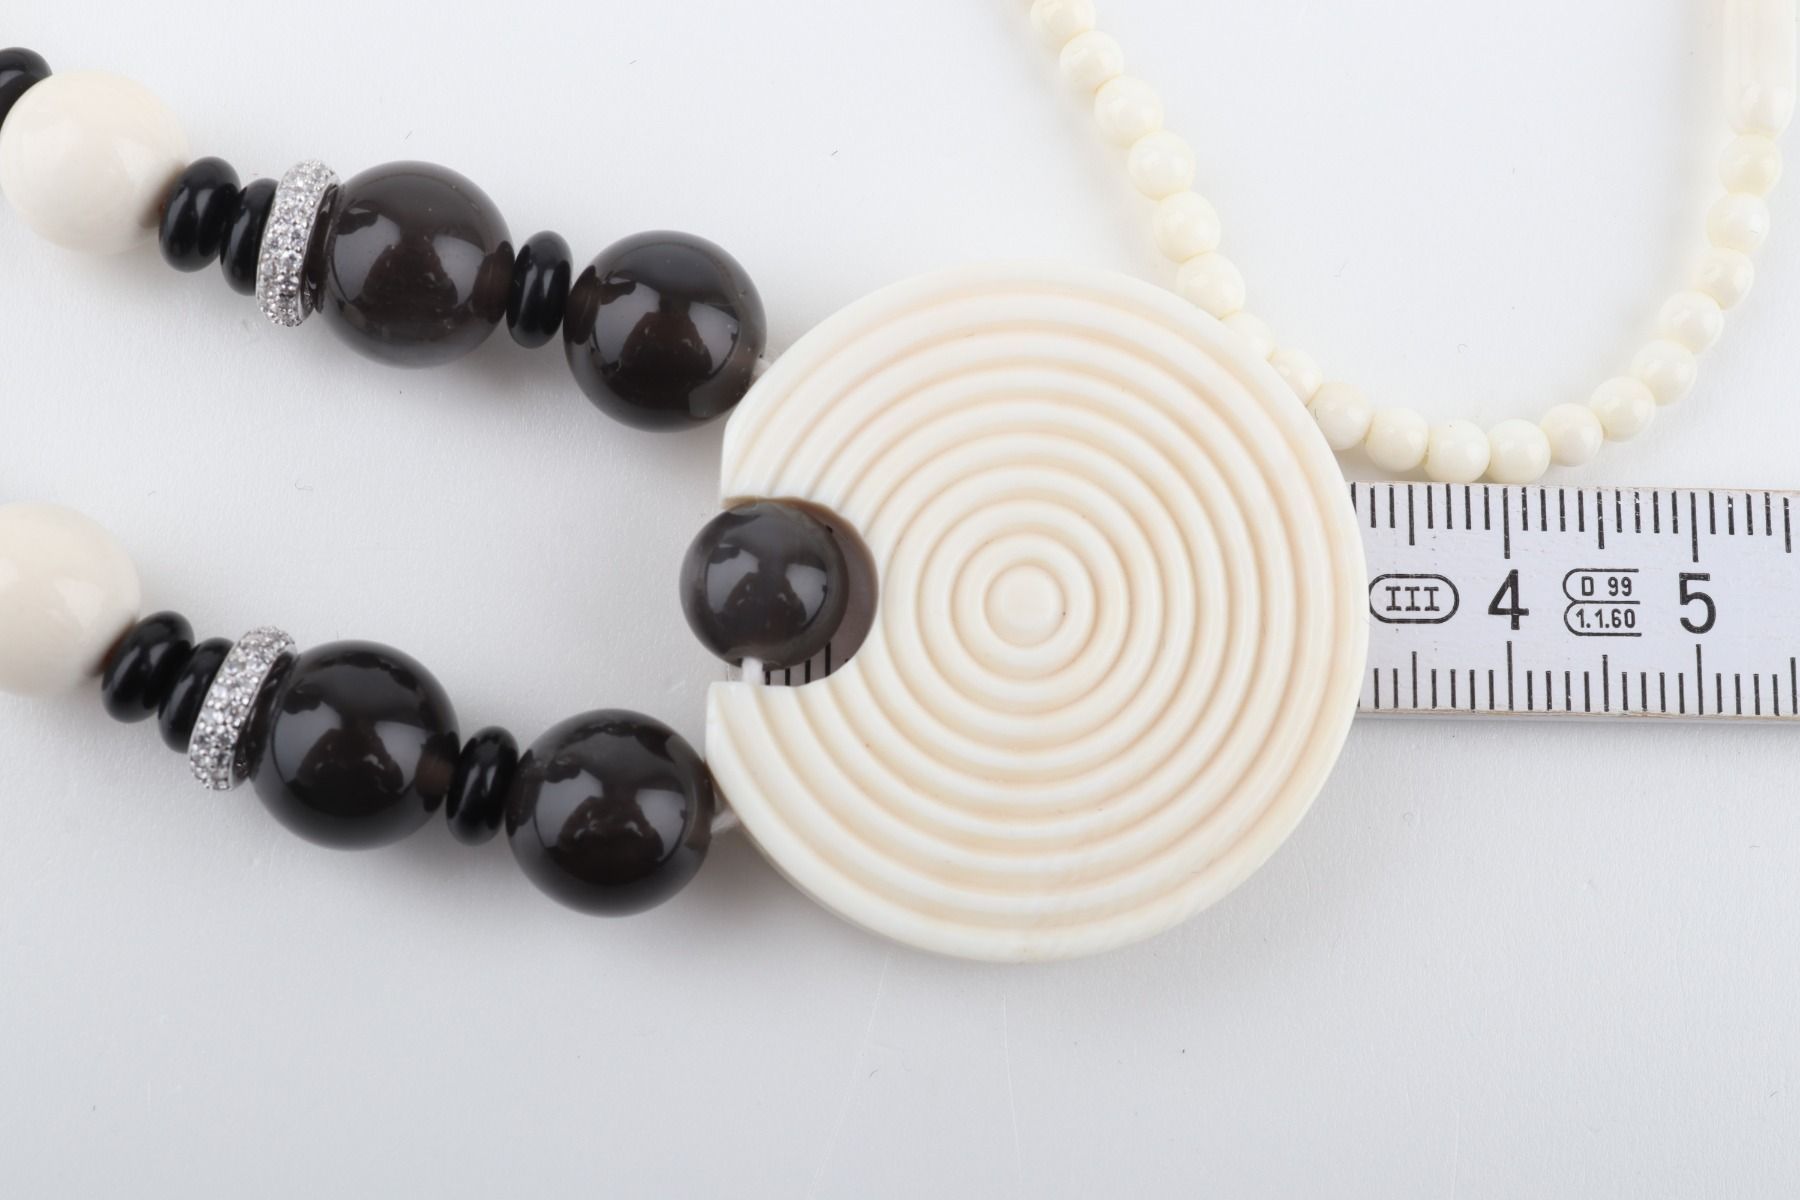 Mammoth Ivory & Agate Statement Necklace